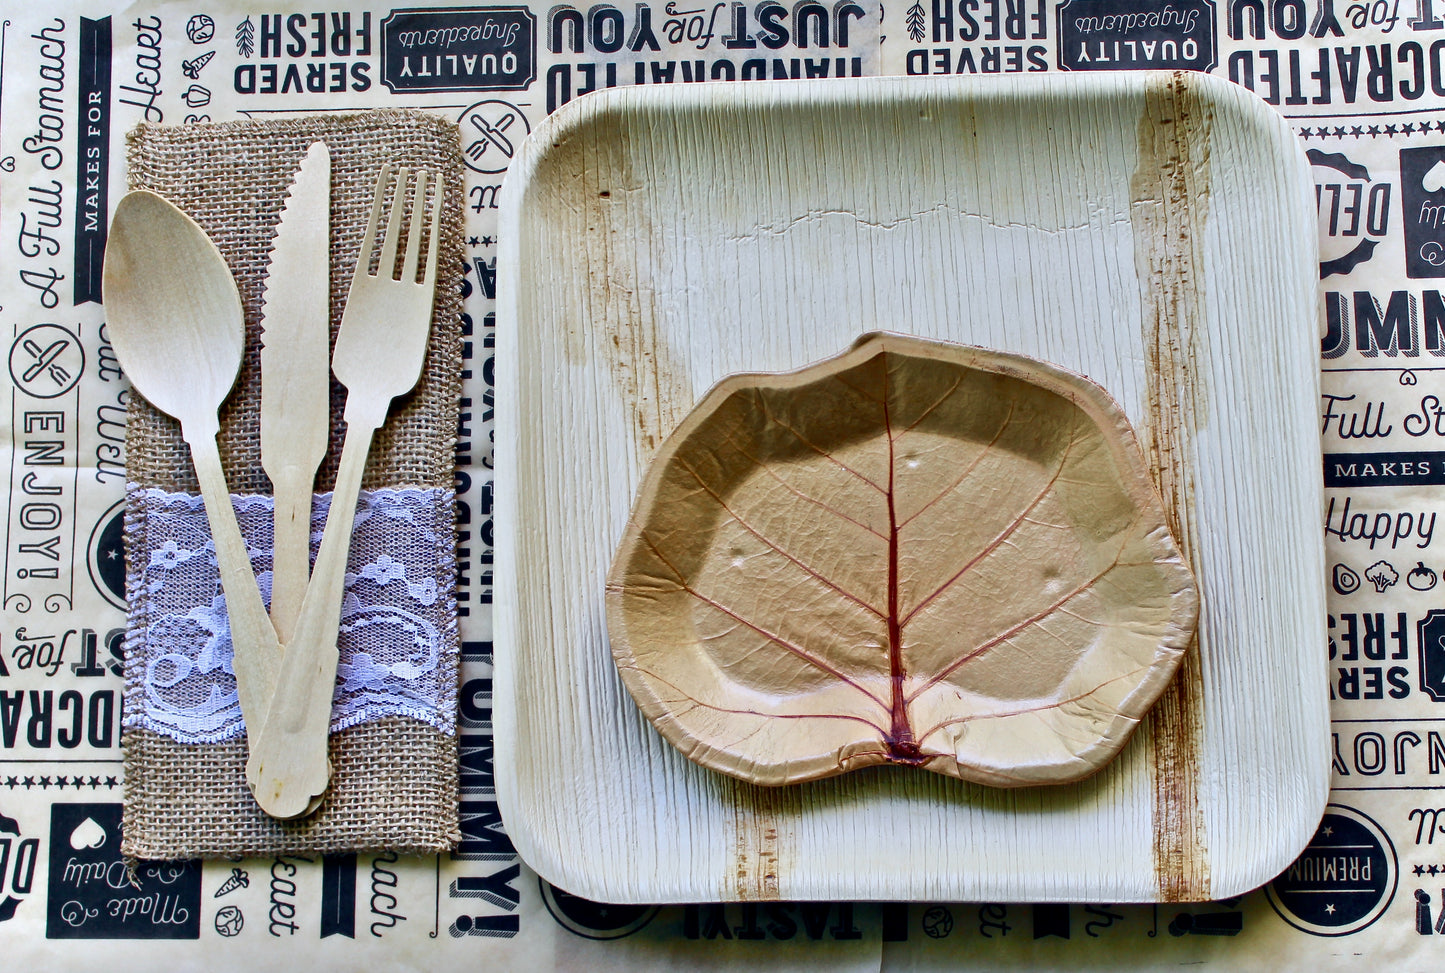 Palm Leaf Plate 100  Pic 10" Round  and 300   Spoon - Knife - Fork    Disposable - Biodegradable - good for Dessert